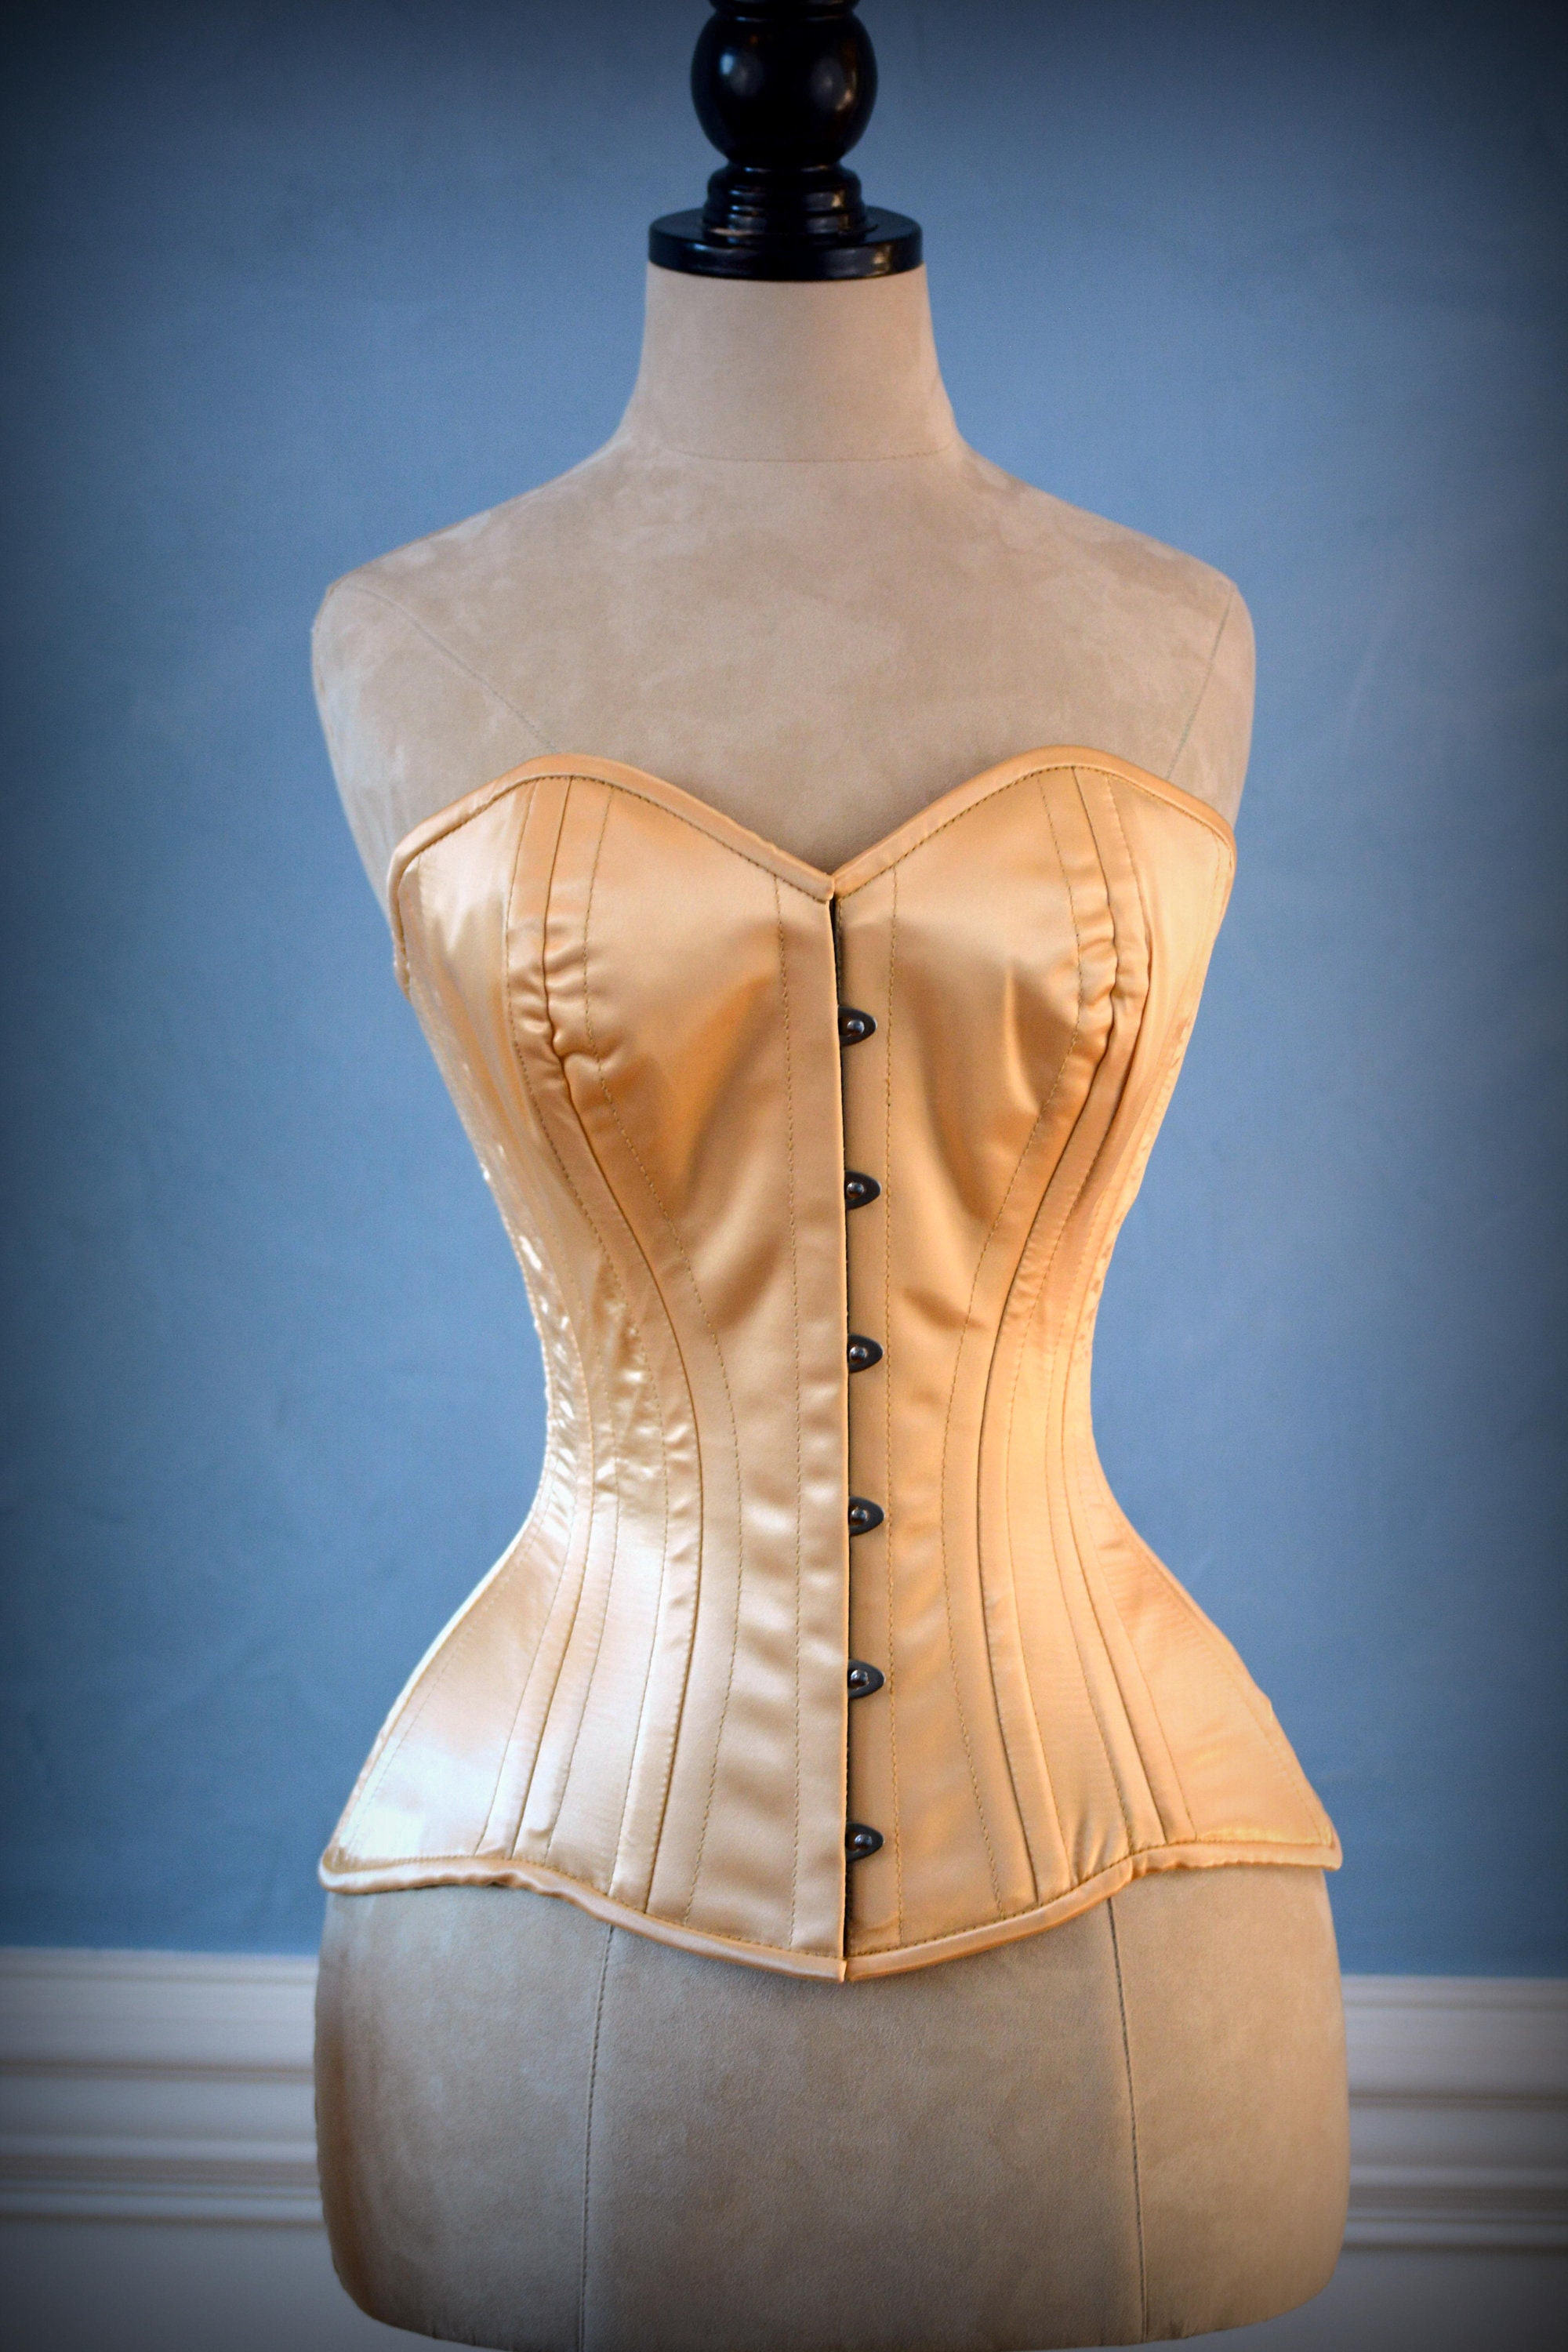 Overbust corset for your perfect fit. - Corset Deal